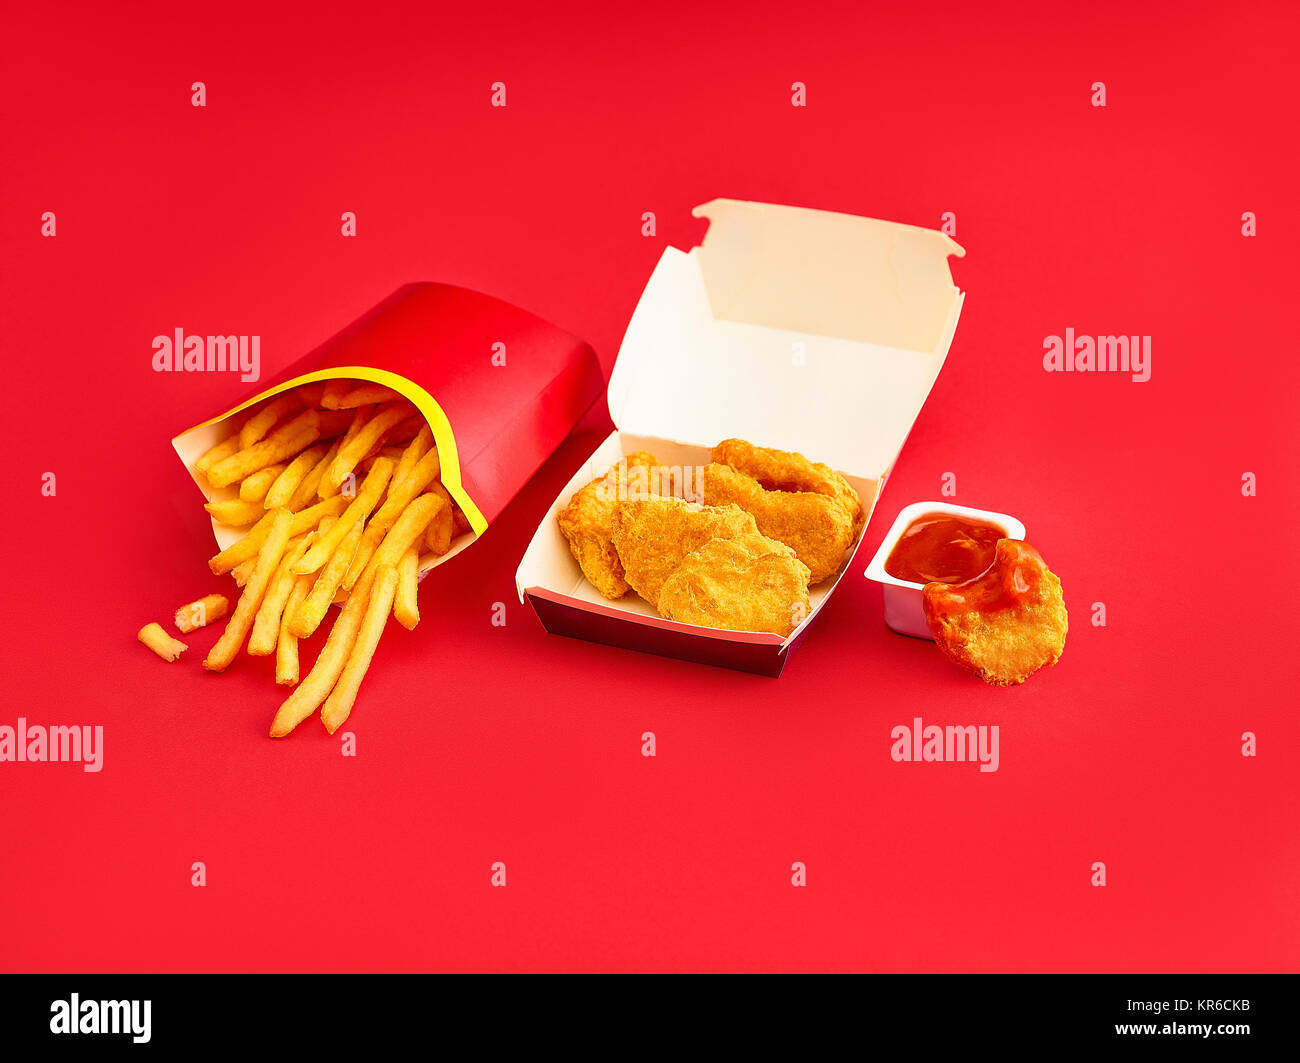 Fries Packaging Isolated Stock Photo, Picture and Royalty Free Image. Image  30563123.